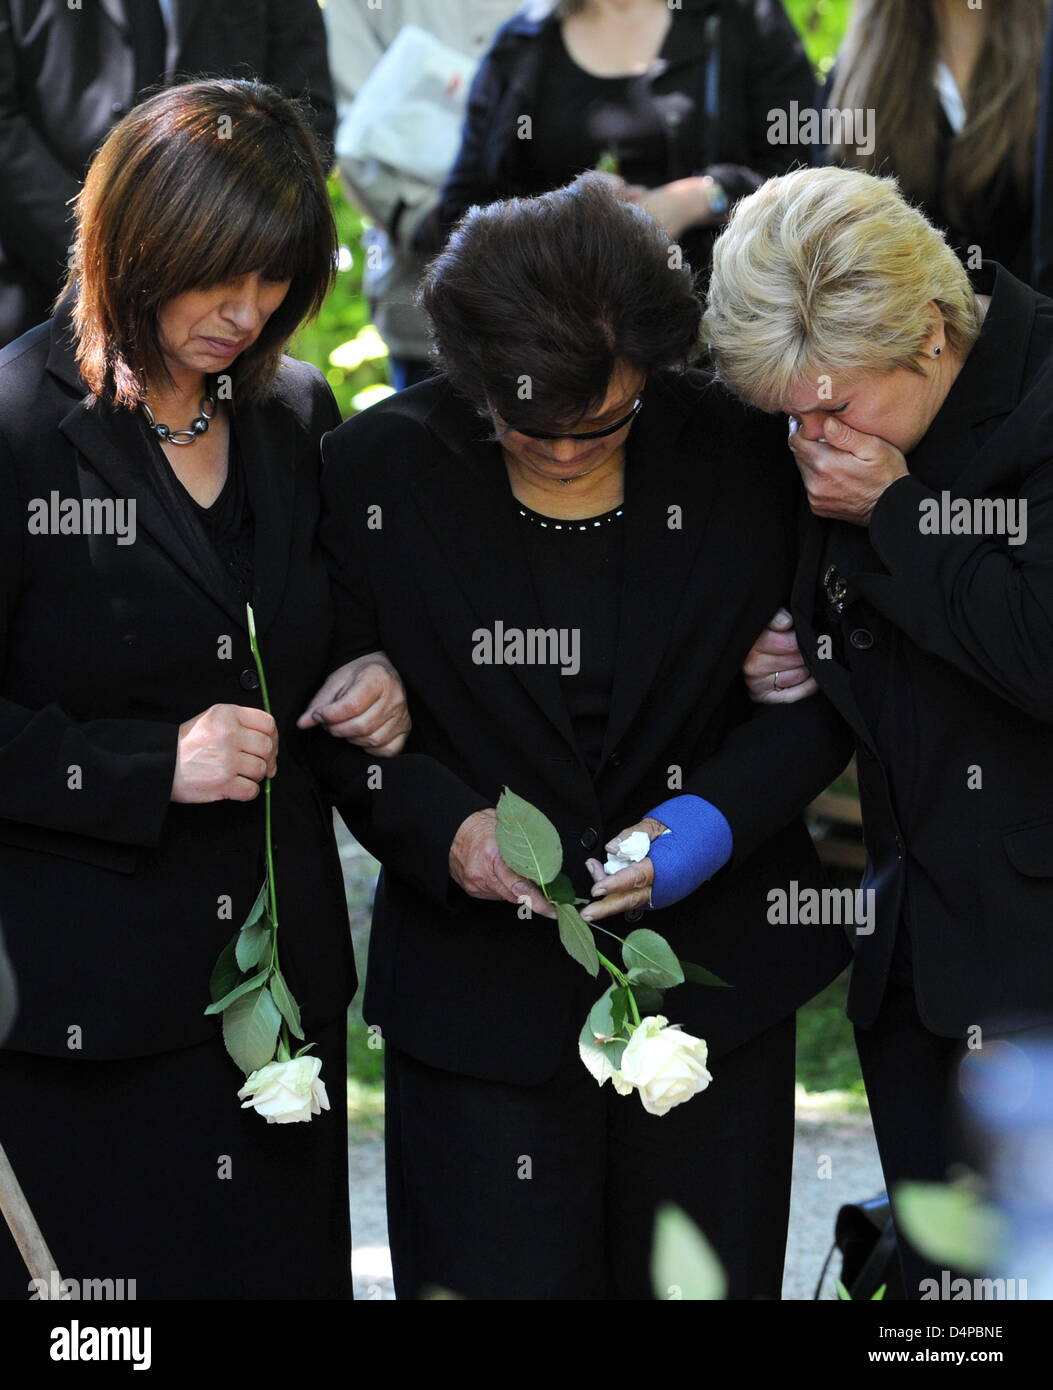 Doris (L) and Beate (R), sisters of Barbara Rudnik, and their mother Margot (C) pictured during the funeral of actress Barbara Rudnik in Munich, Germany, 29 May 2009. Rudnik passed away aged 50 on 23 May 2009 after a long struggle against cancer. Photo: Tobias Hase Stock Photo